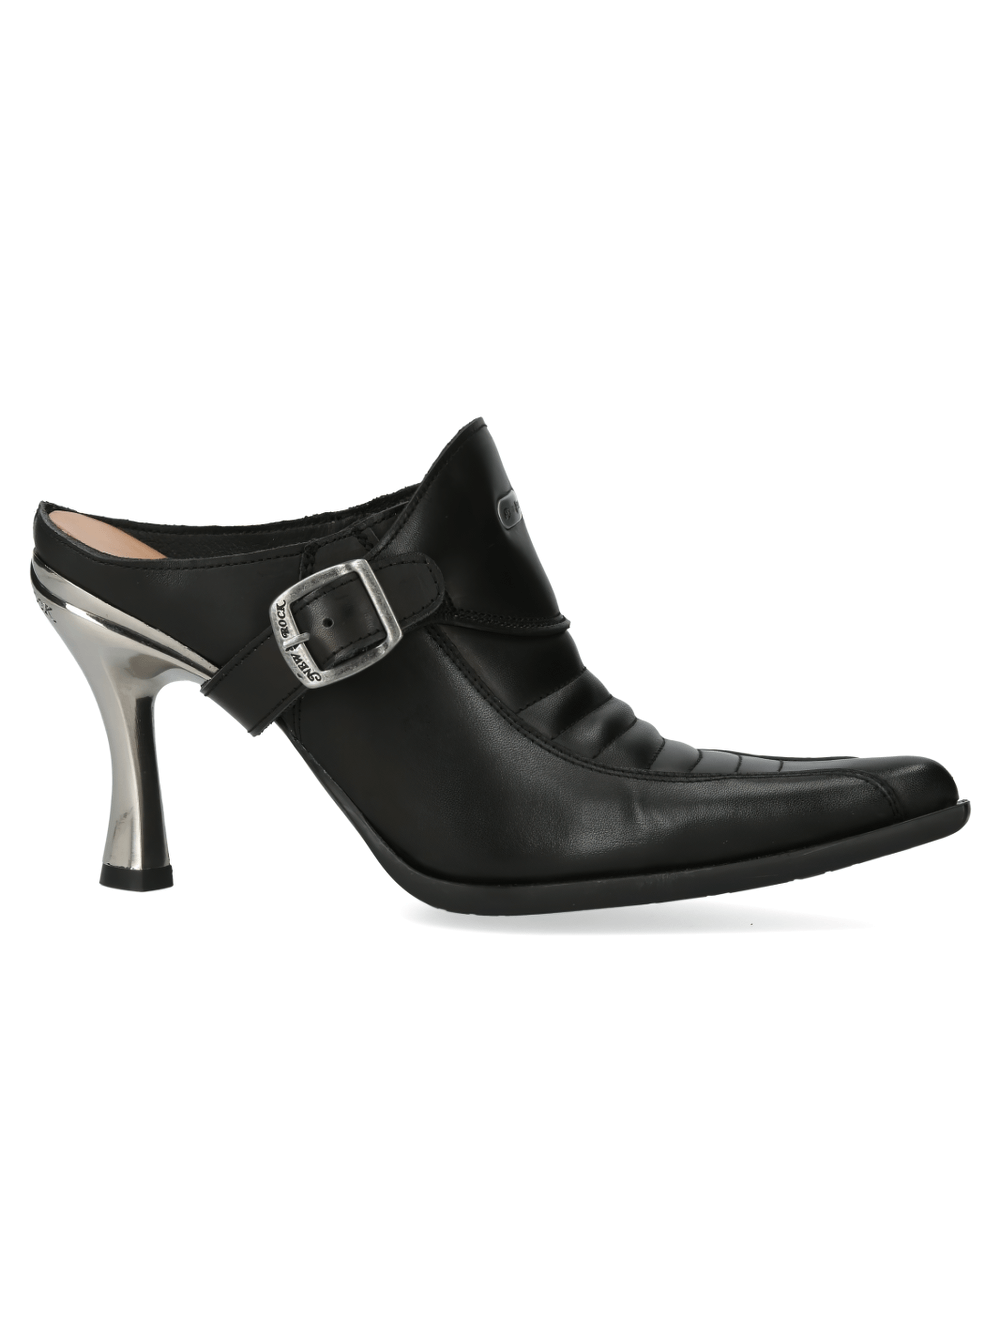 NEW ROCK Elegant Pointed Heel Buckle Shoes in Black Leather